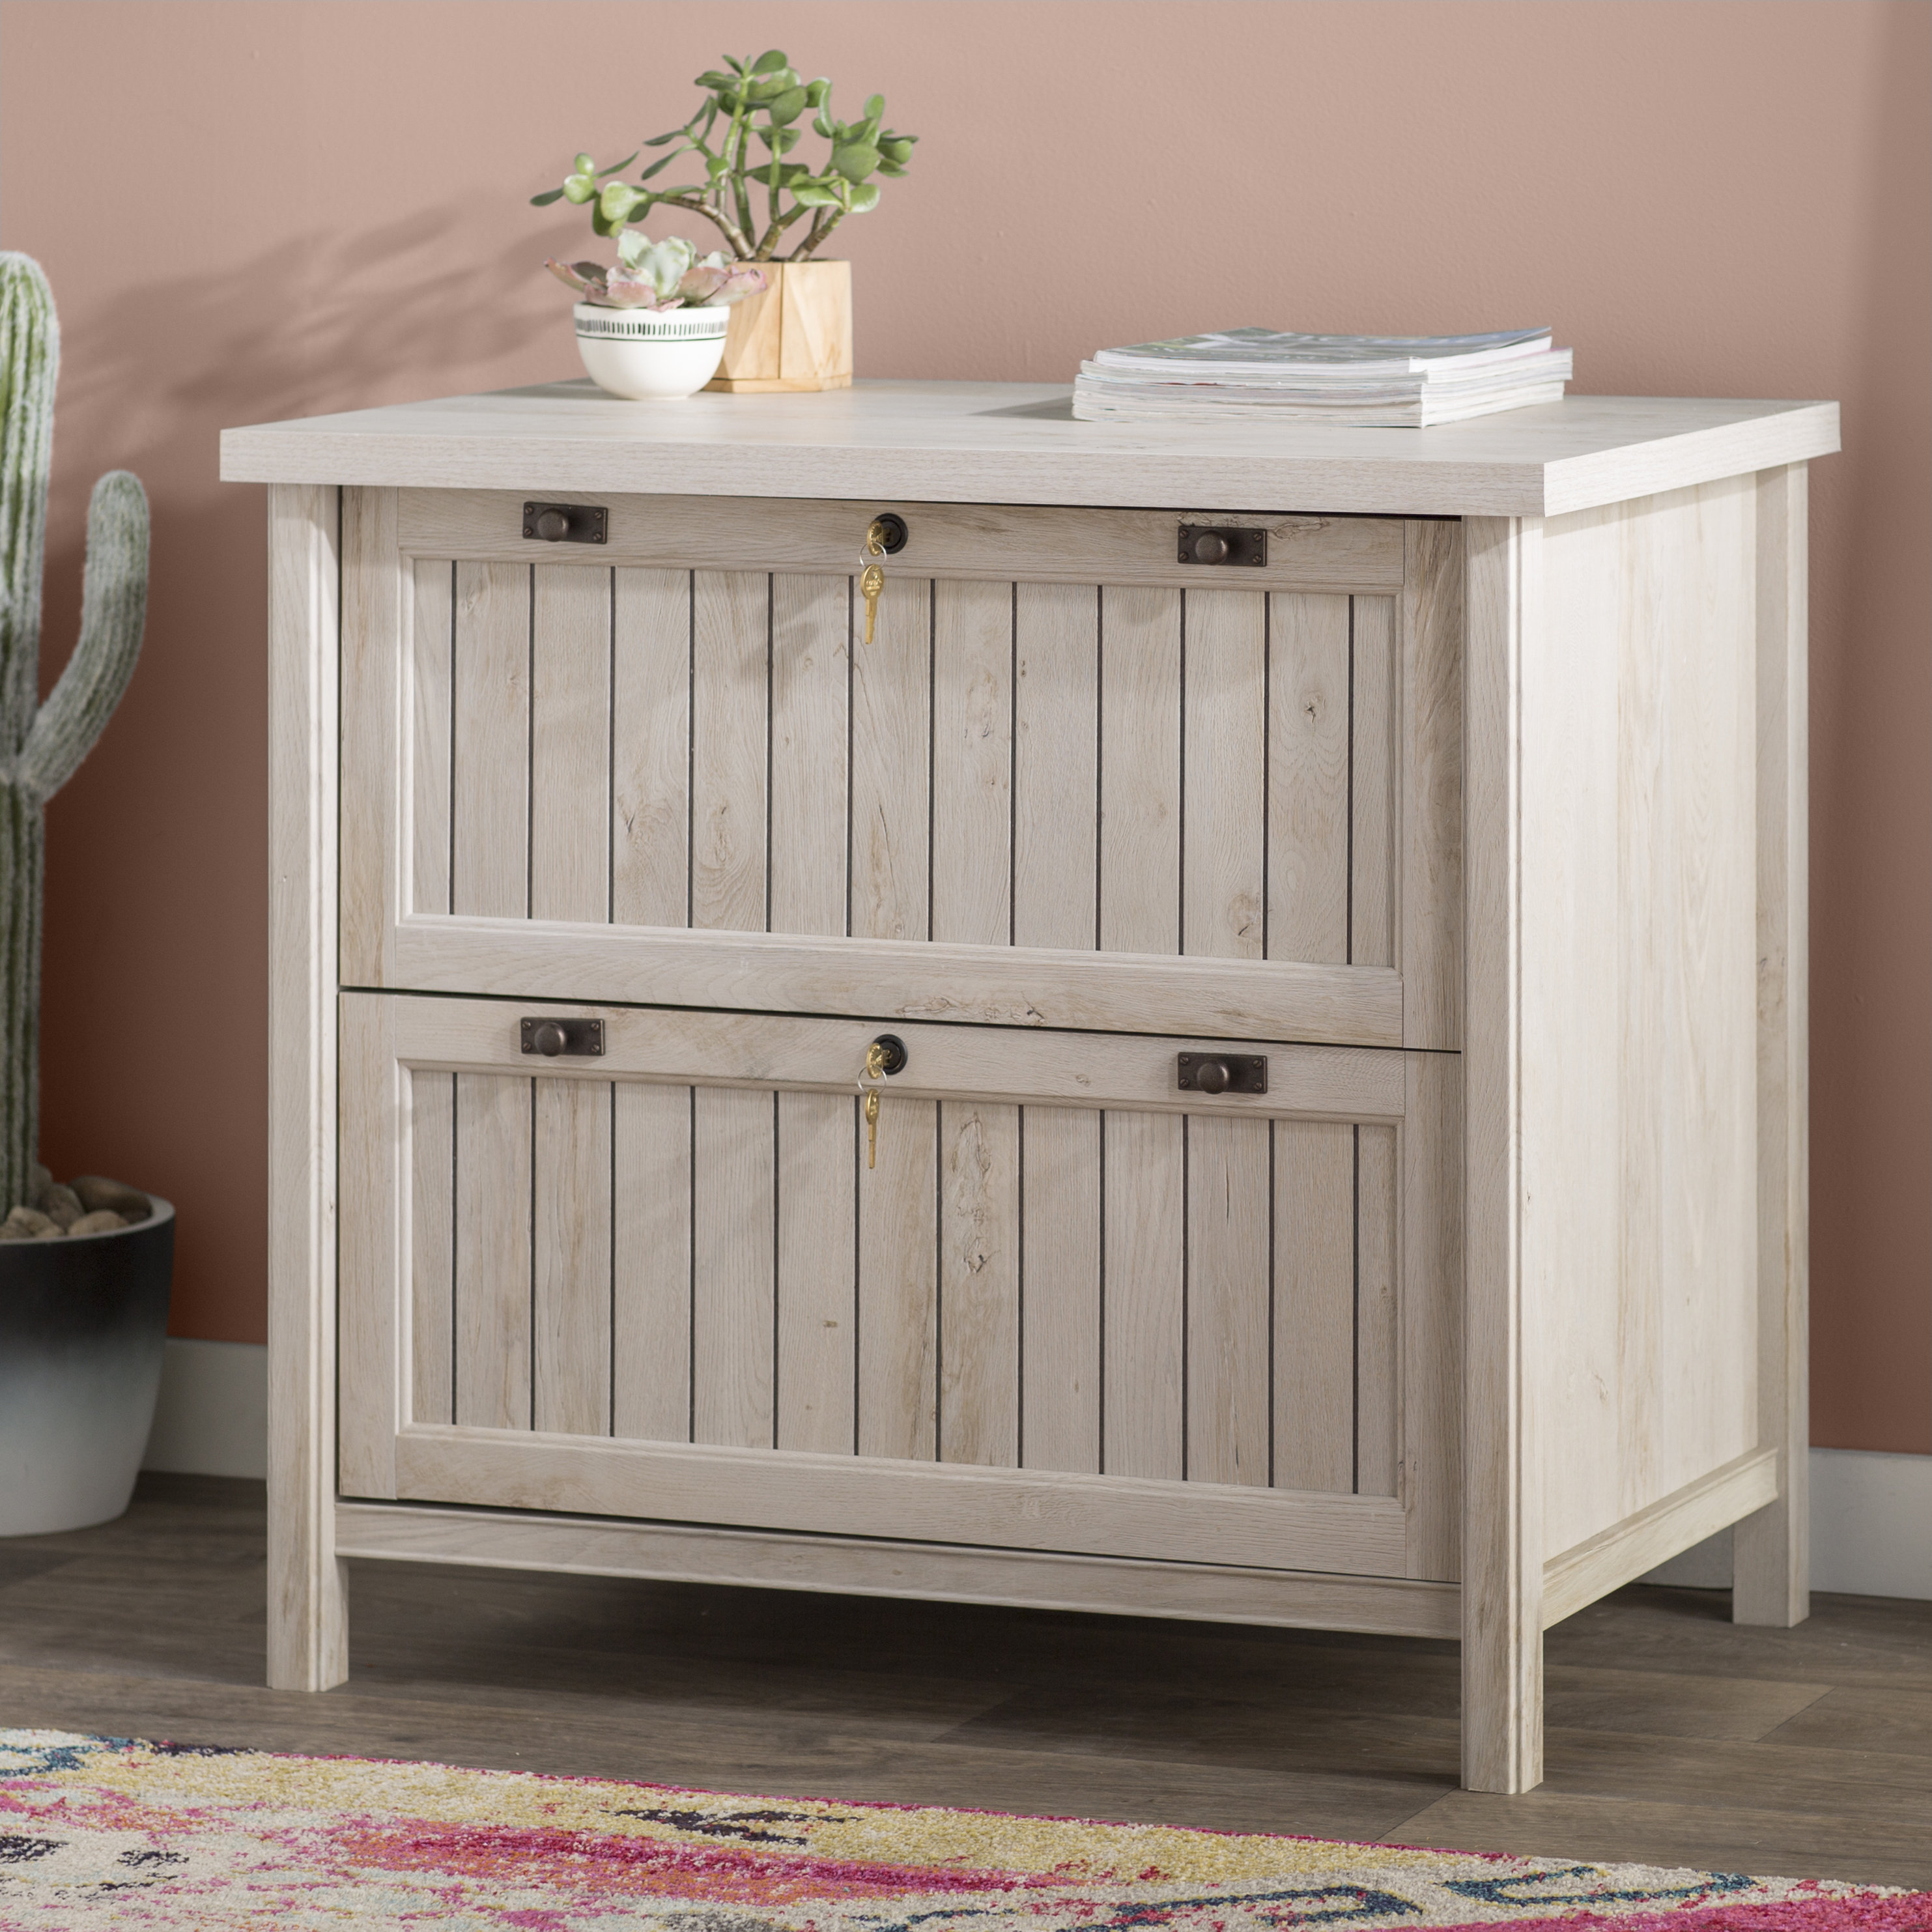 Laurel Foundry Modern Farmhouse Shelby 2 Drawer Lateral Filing